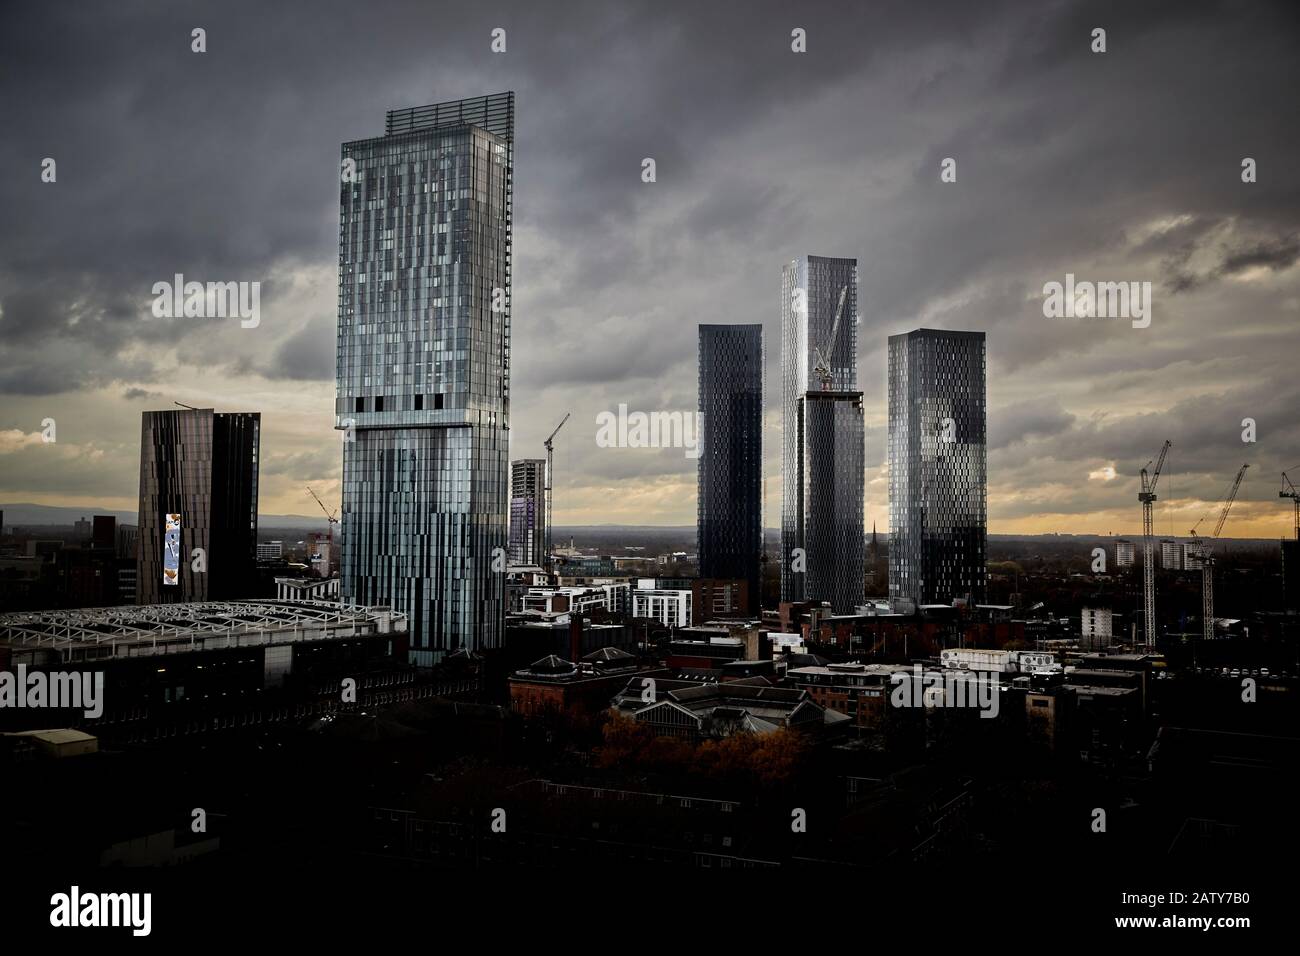 Manchester city center skyline with landmark Beetham Tower and Deansgate Square behind. Stock Photo